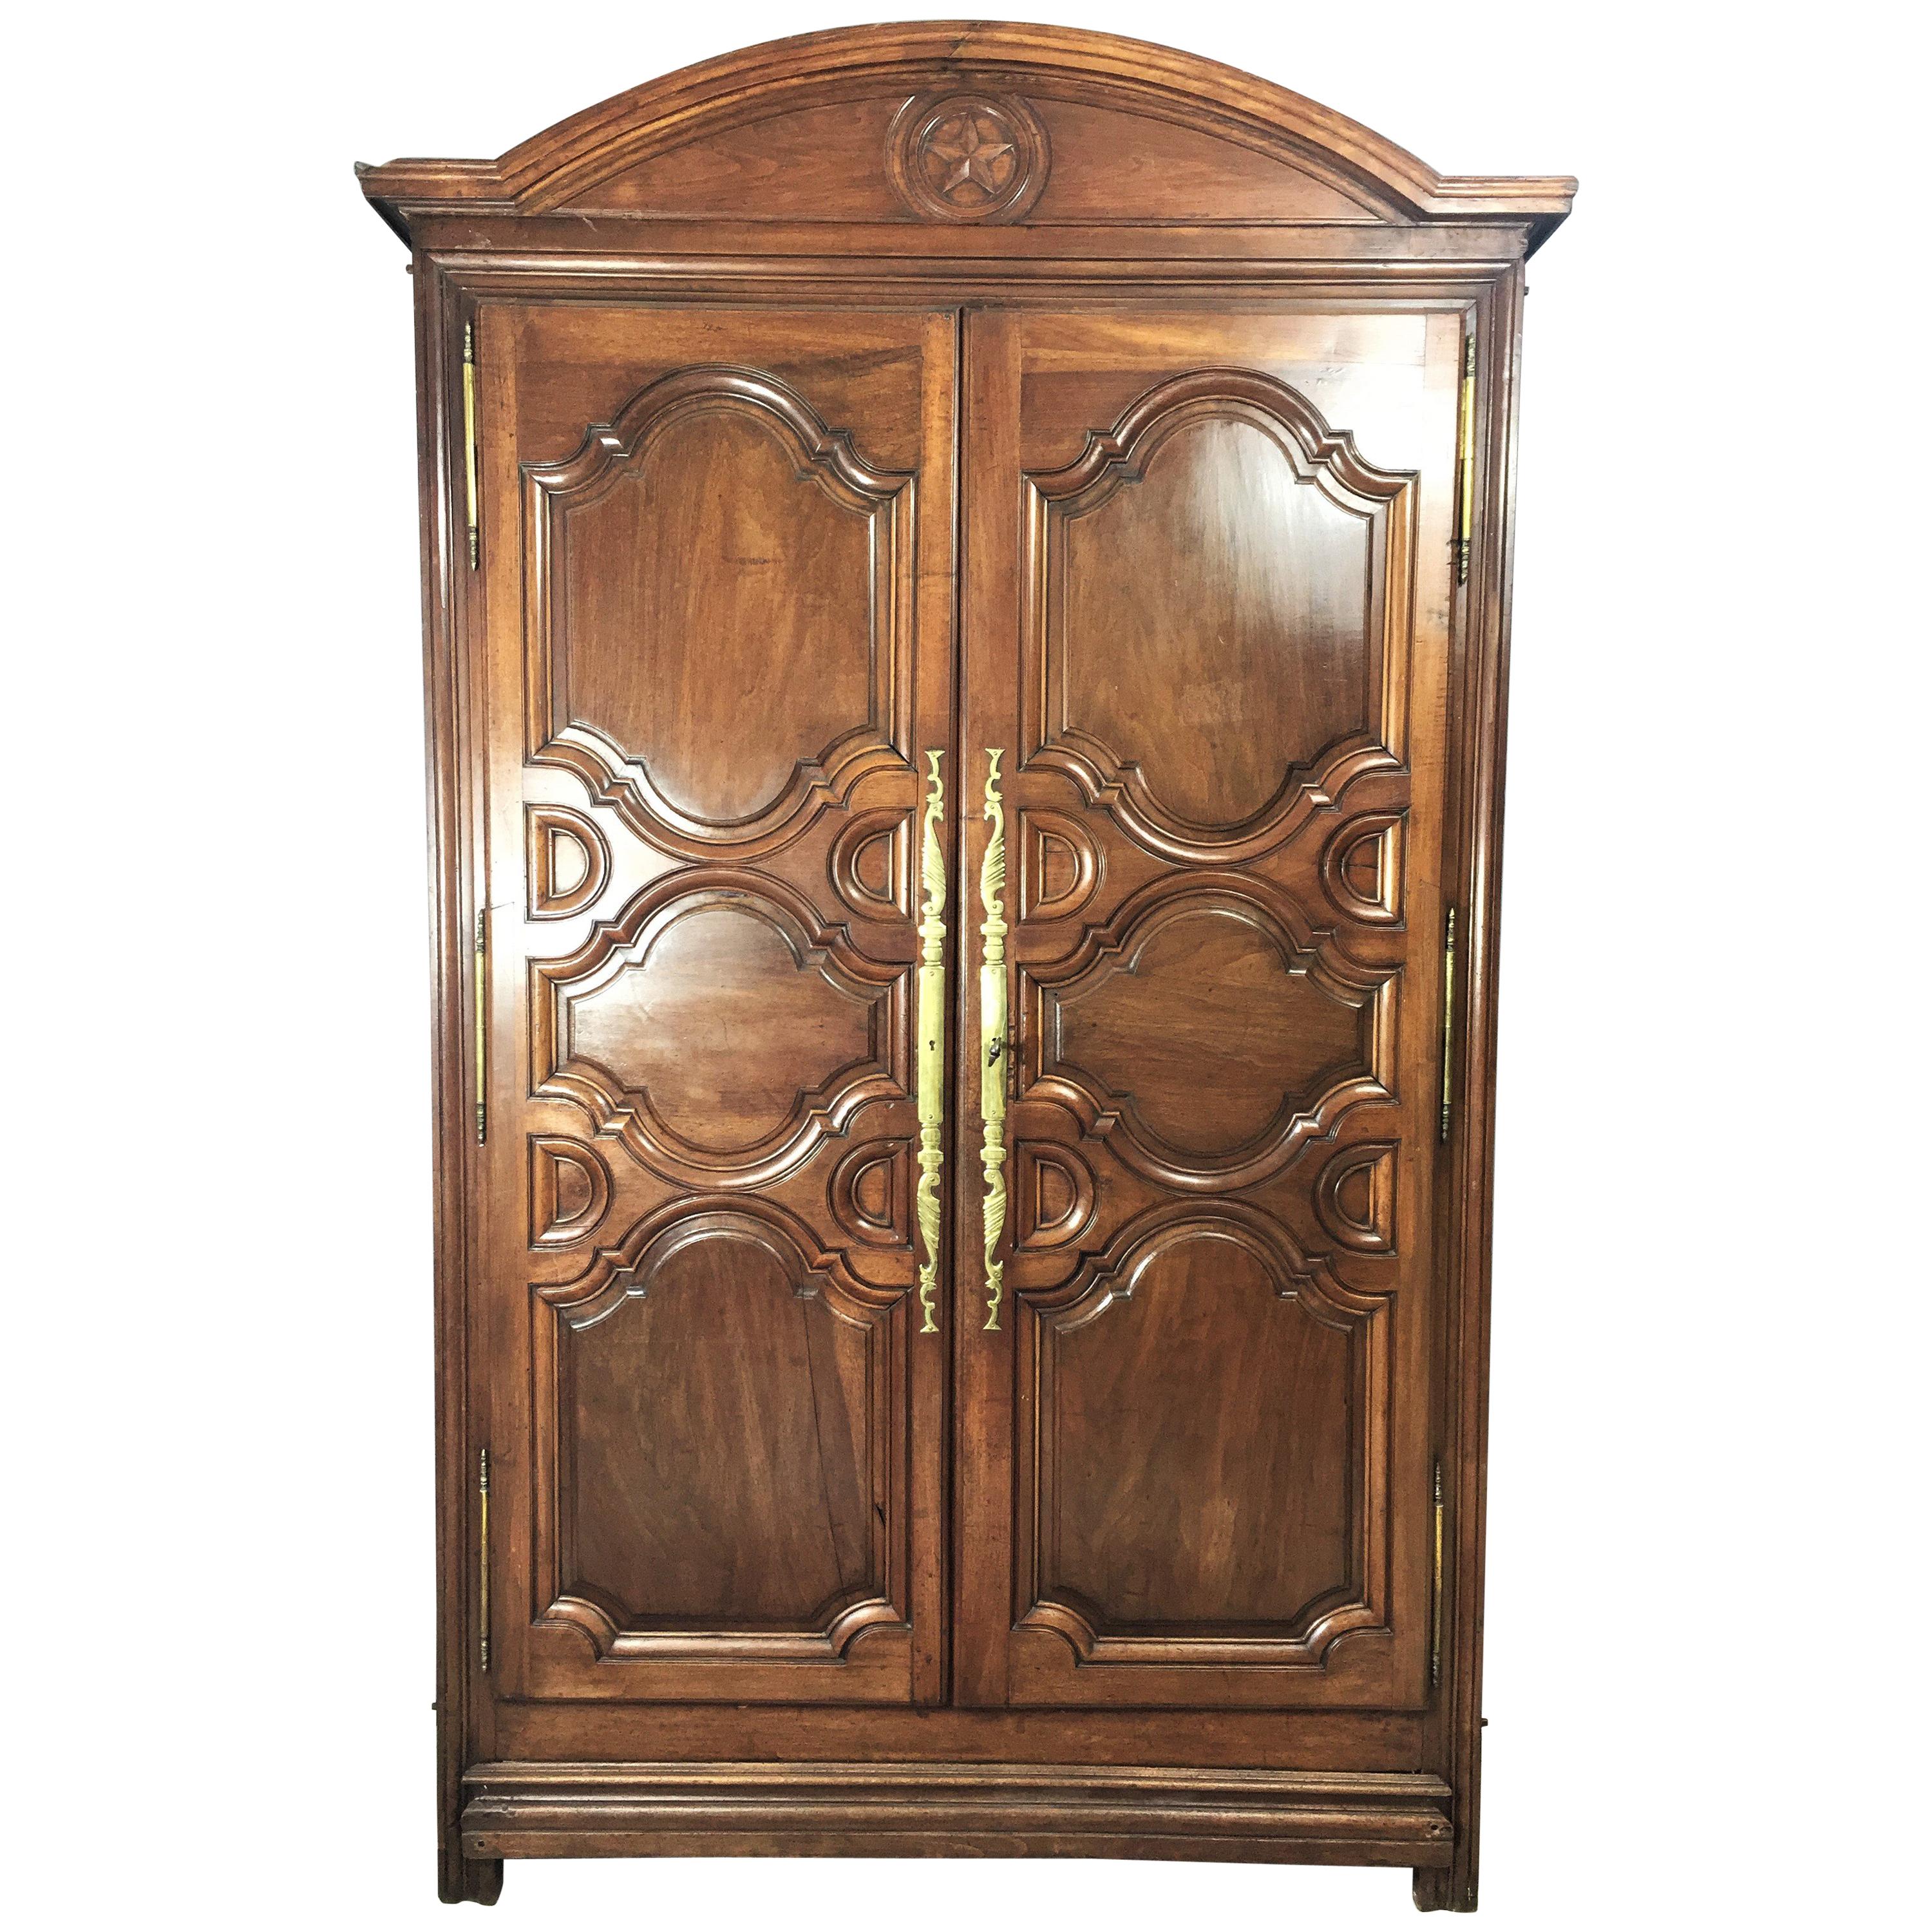 Louis 14 Armoire Paris in Walnut end of the 17th early 18th Century